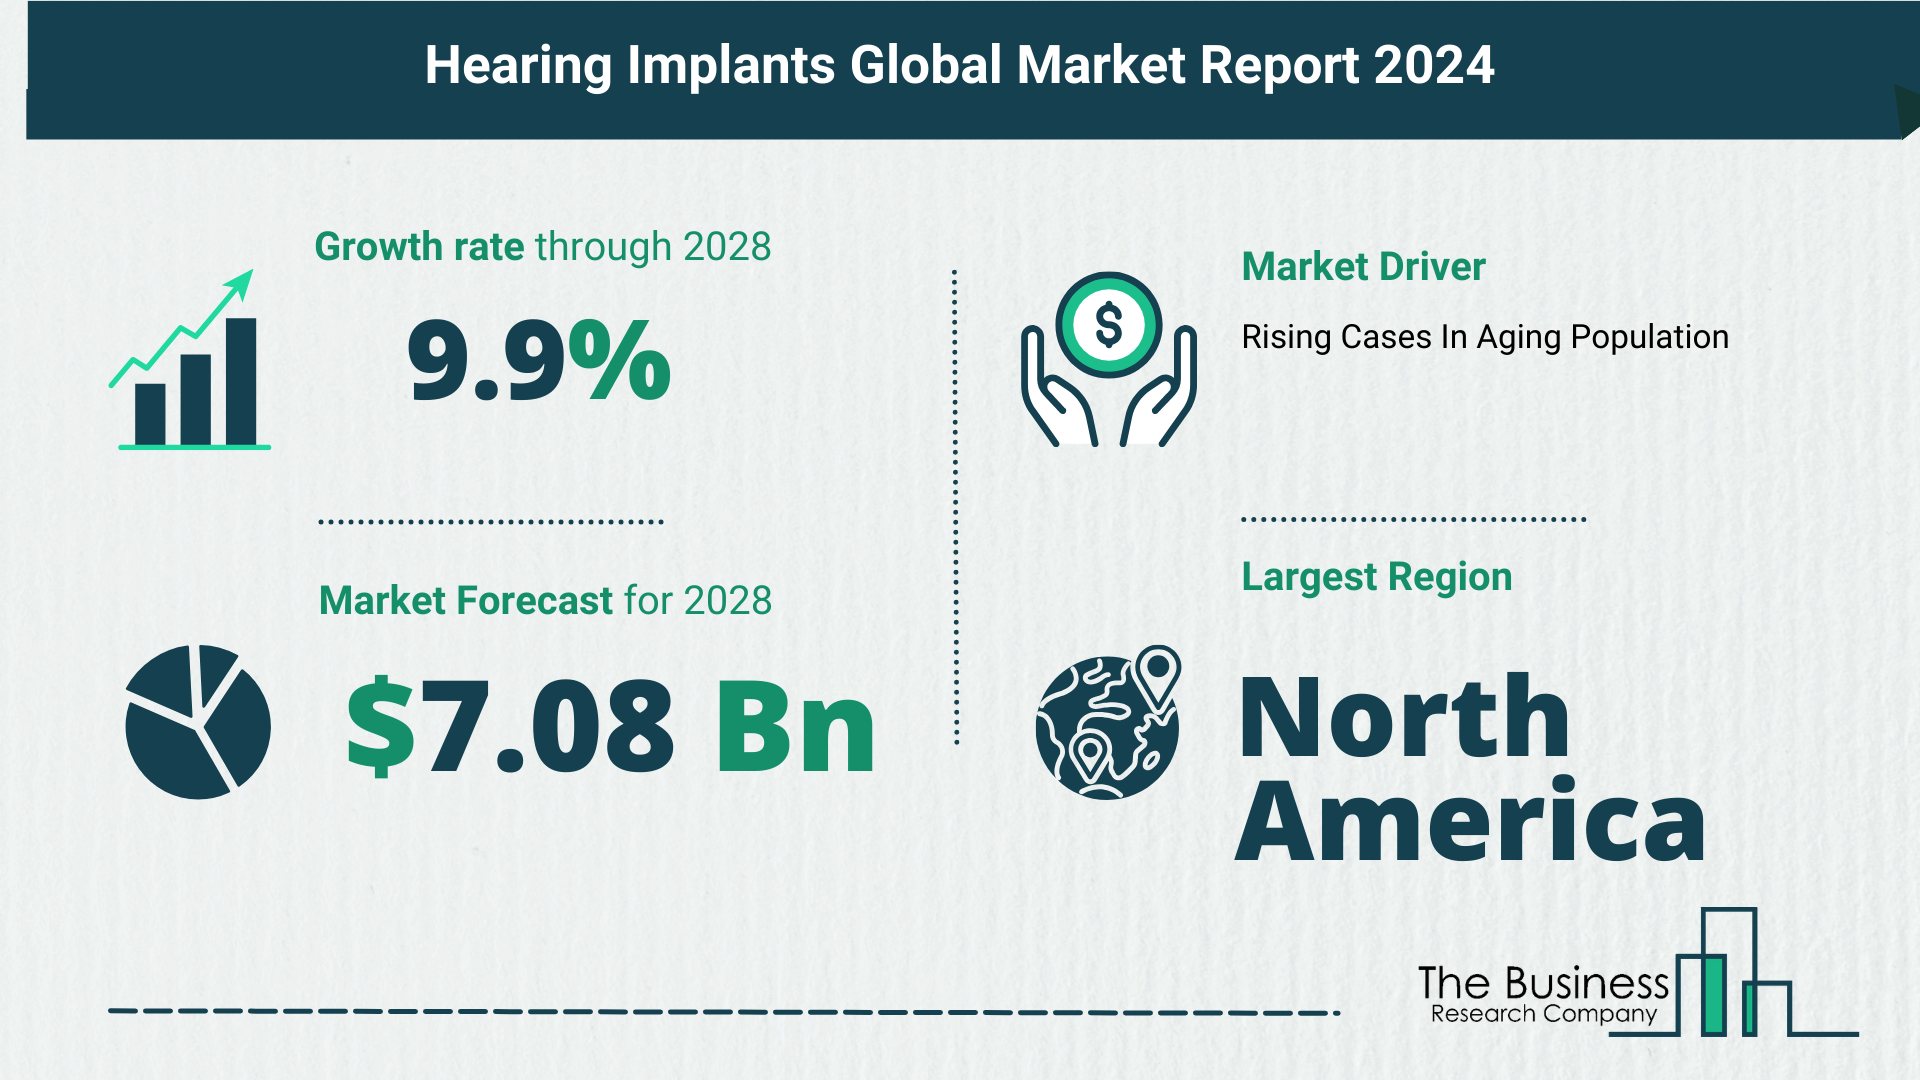 What Is The Forecast Growth Rate For The Hearing Implants Market?